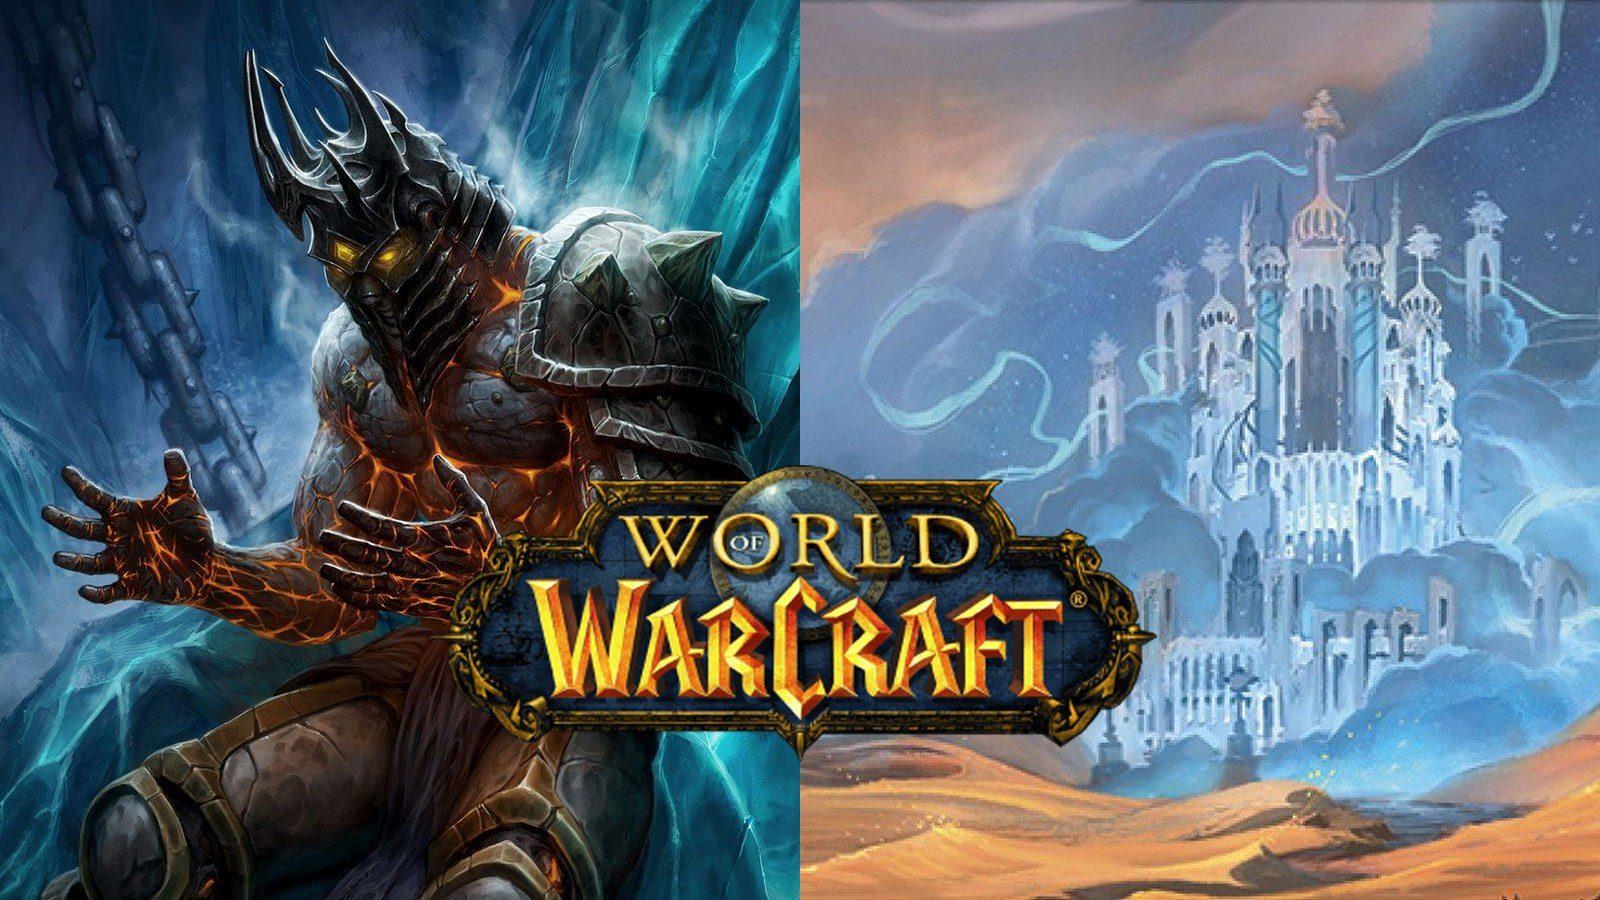 New World of Warcraft expansion possibly leaked before BlizzCon